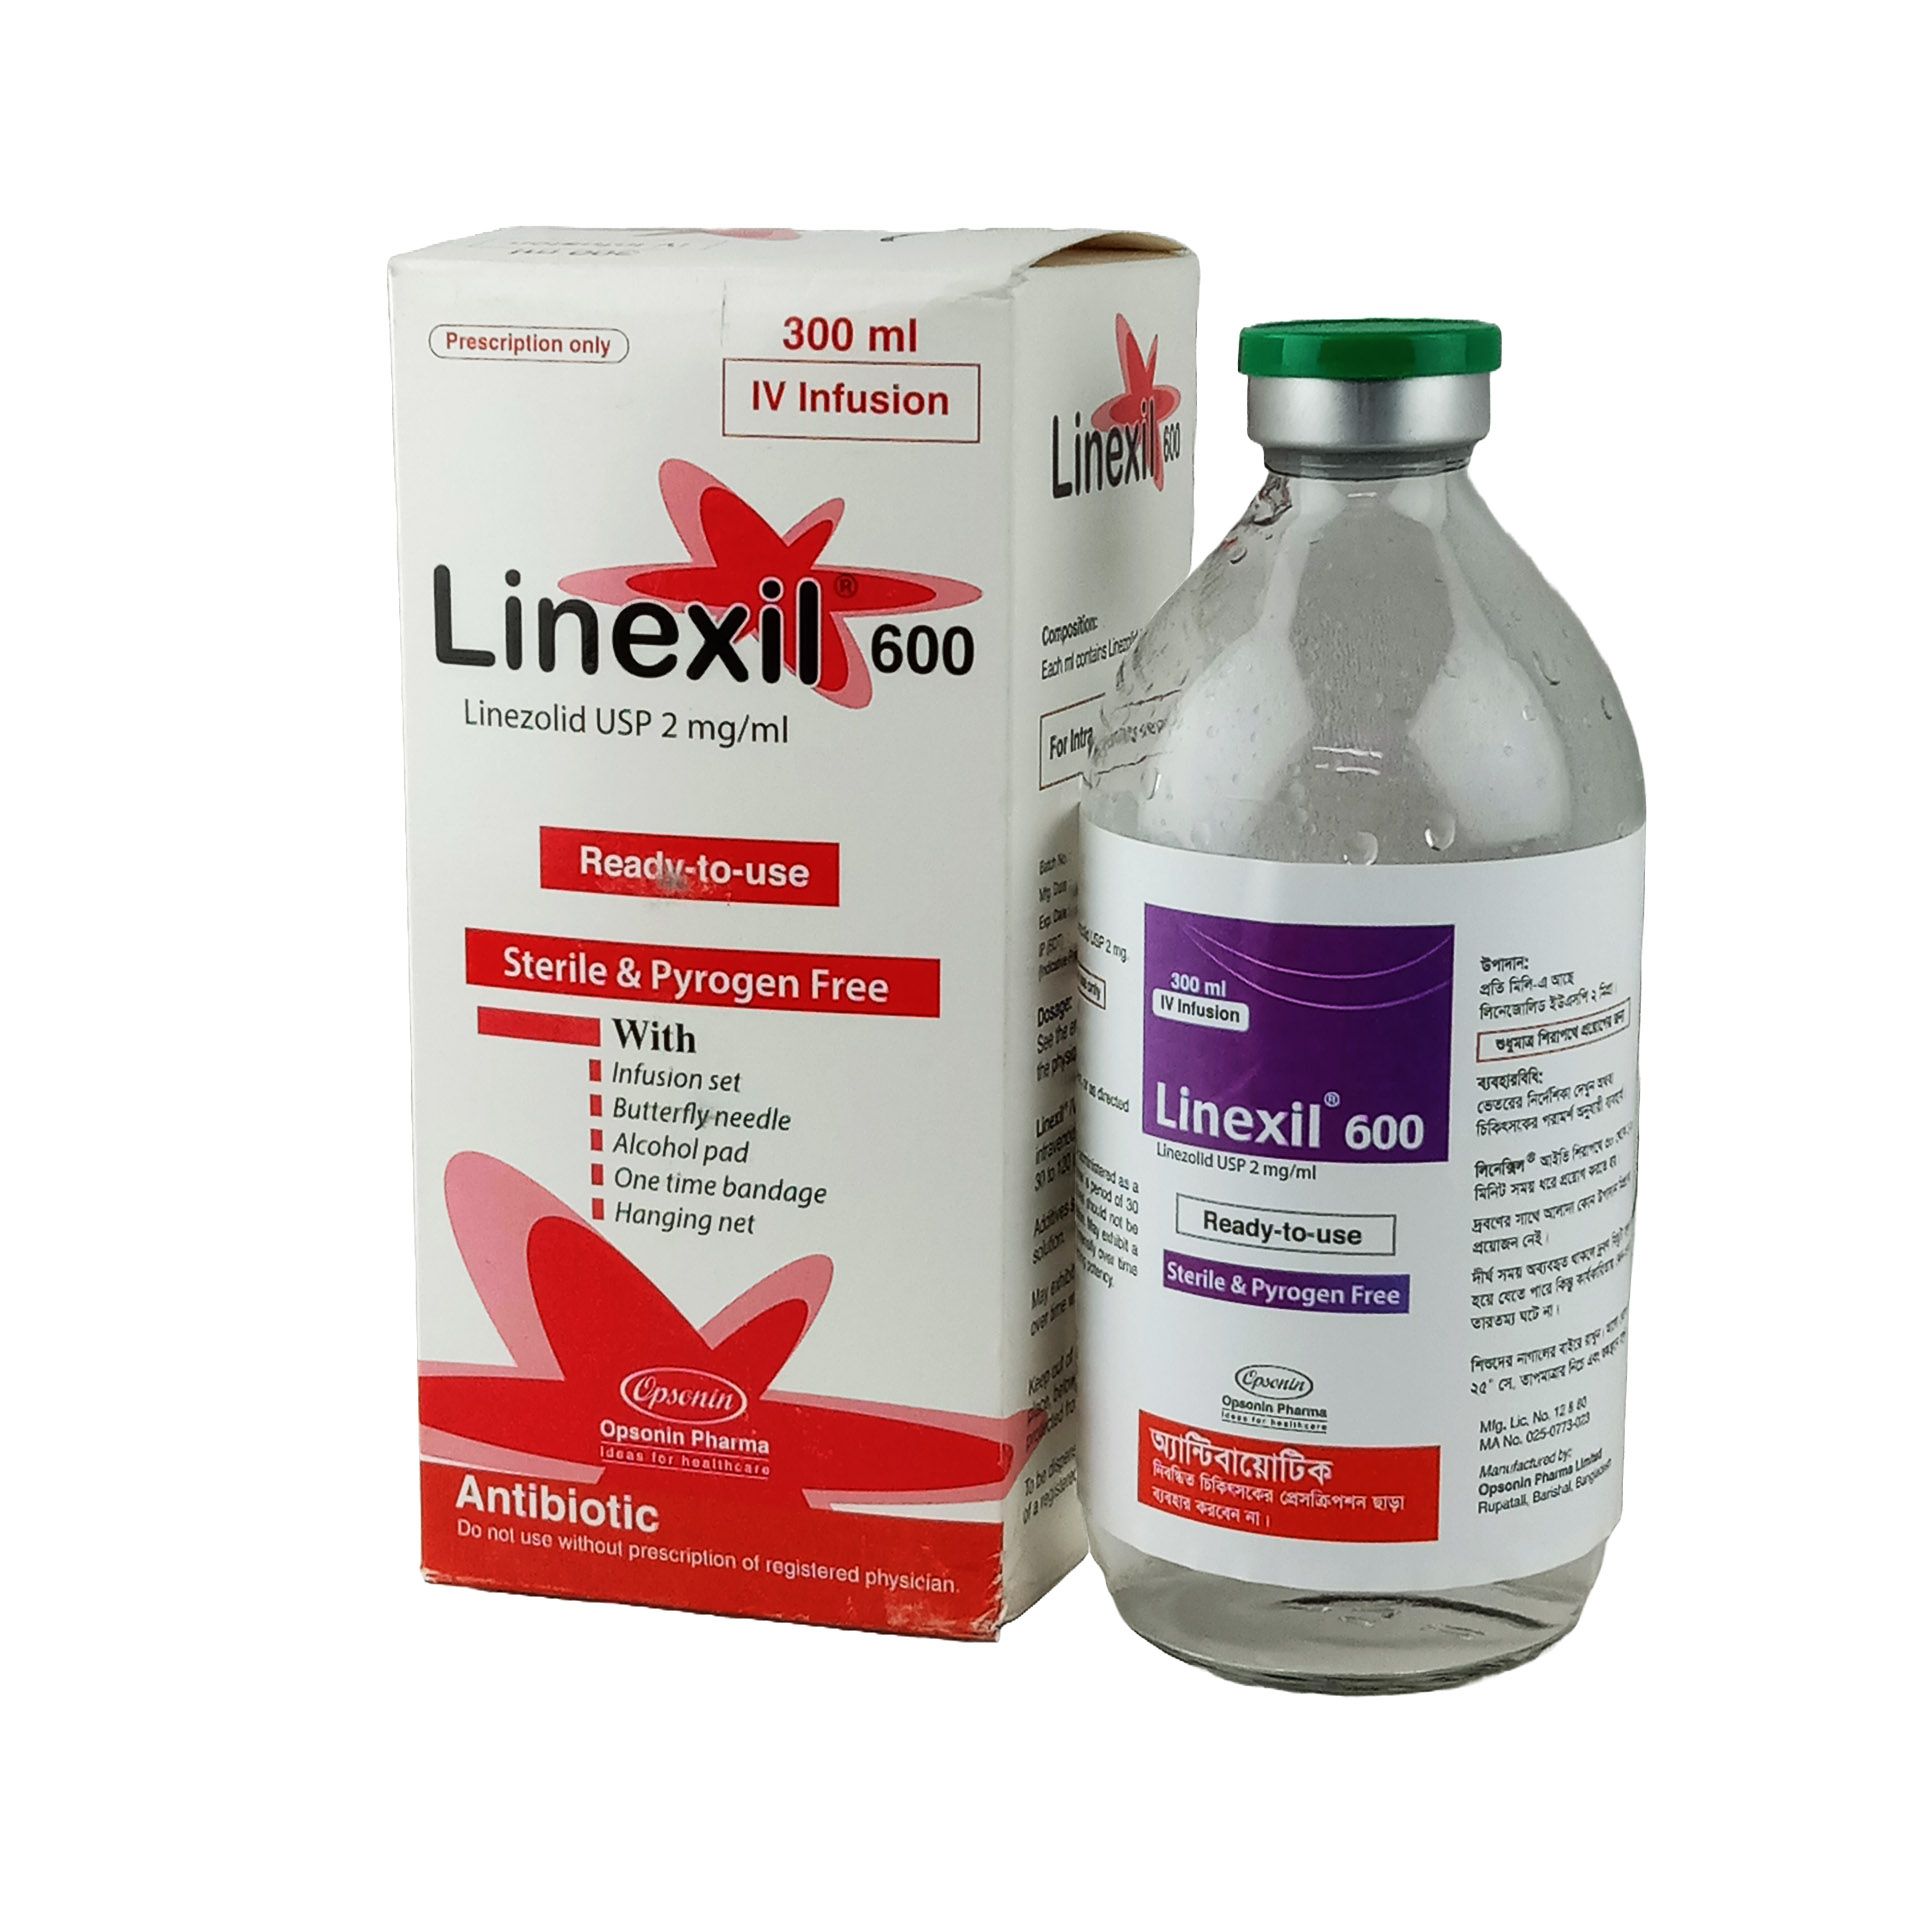 Linexil IV Infusion 0.20% Solution